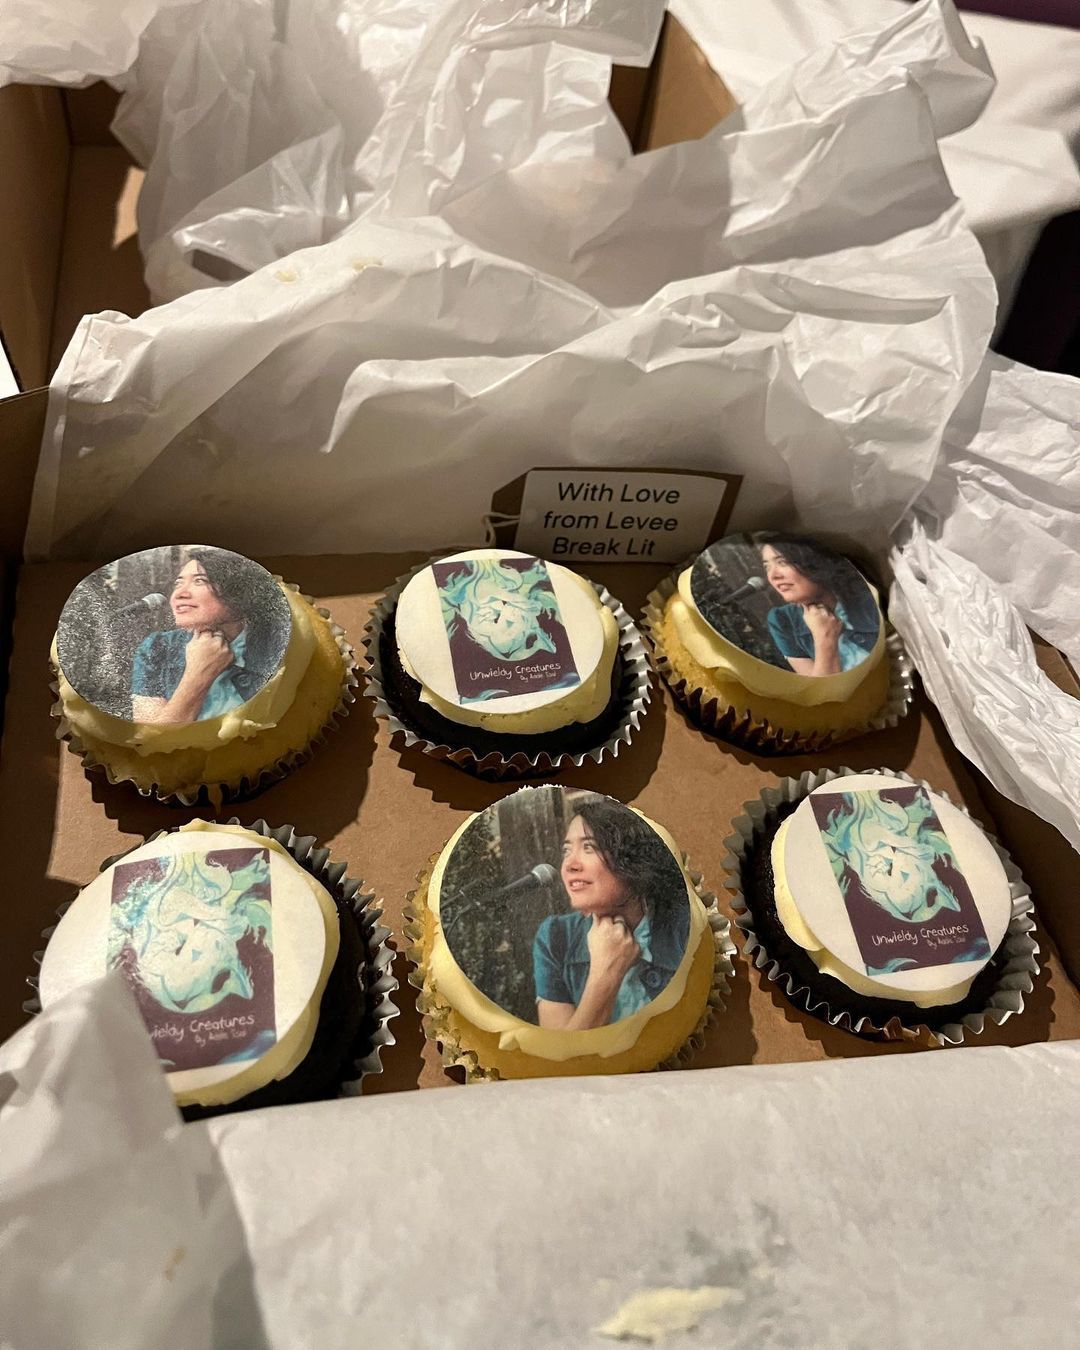 A box of six chocolate and vanilla cake cupcakes, each one topped with an edible image of either author Addie Tsai or the cover of their book Unwieldy Creatures. The cover features an abstract illustration of a curled-up person, with their head nestled into their arms, surrounded by blue and green flame-like shapes.